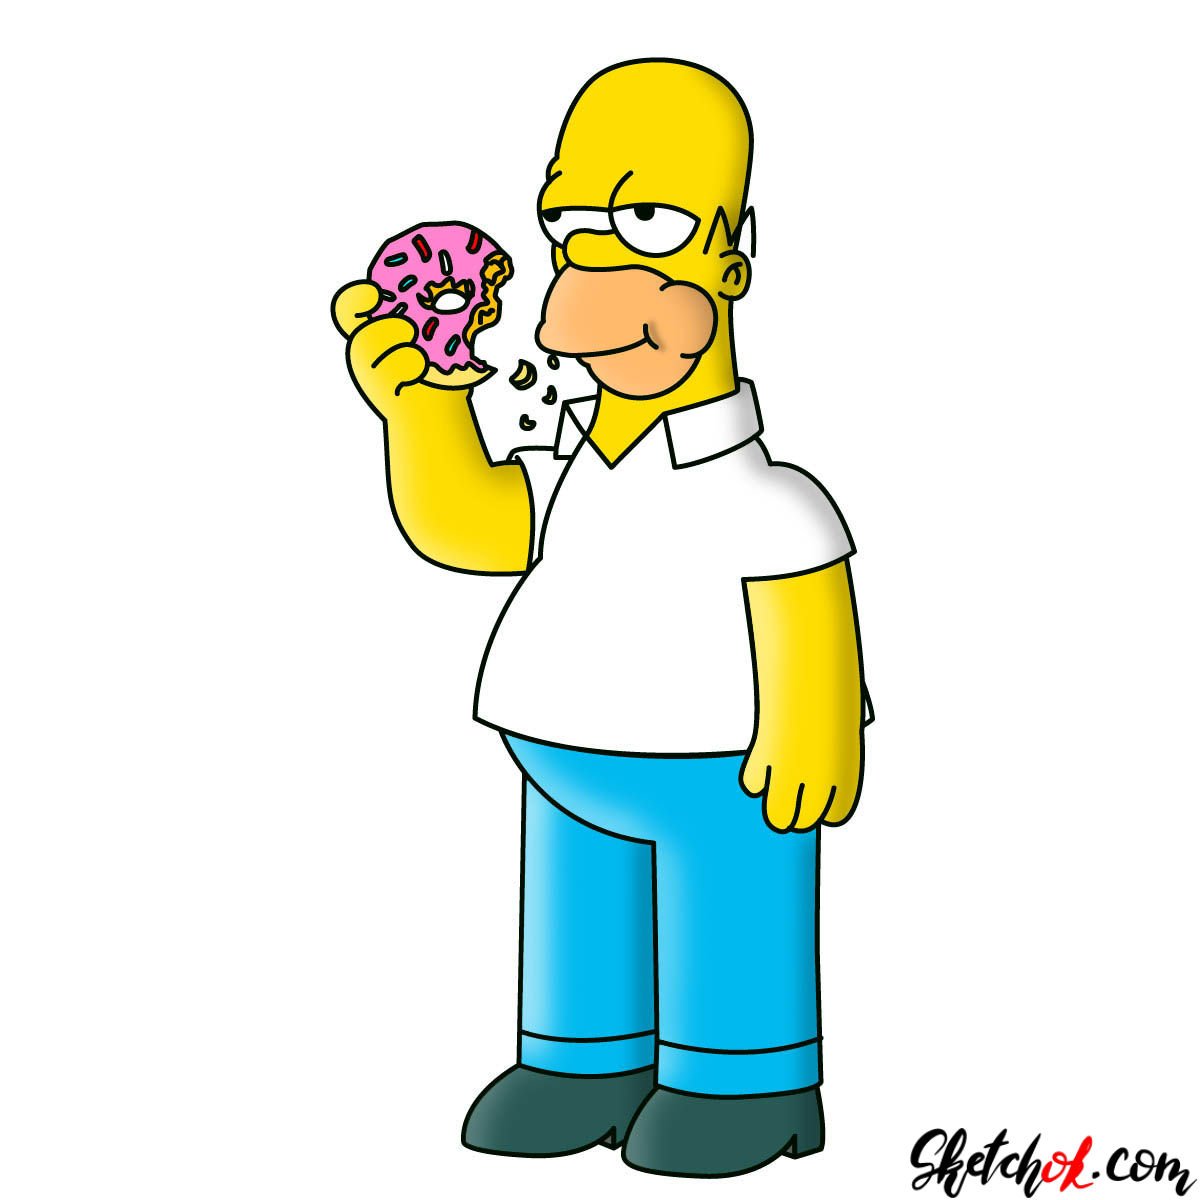 How to draw Homer Simpson eating a donut